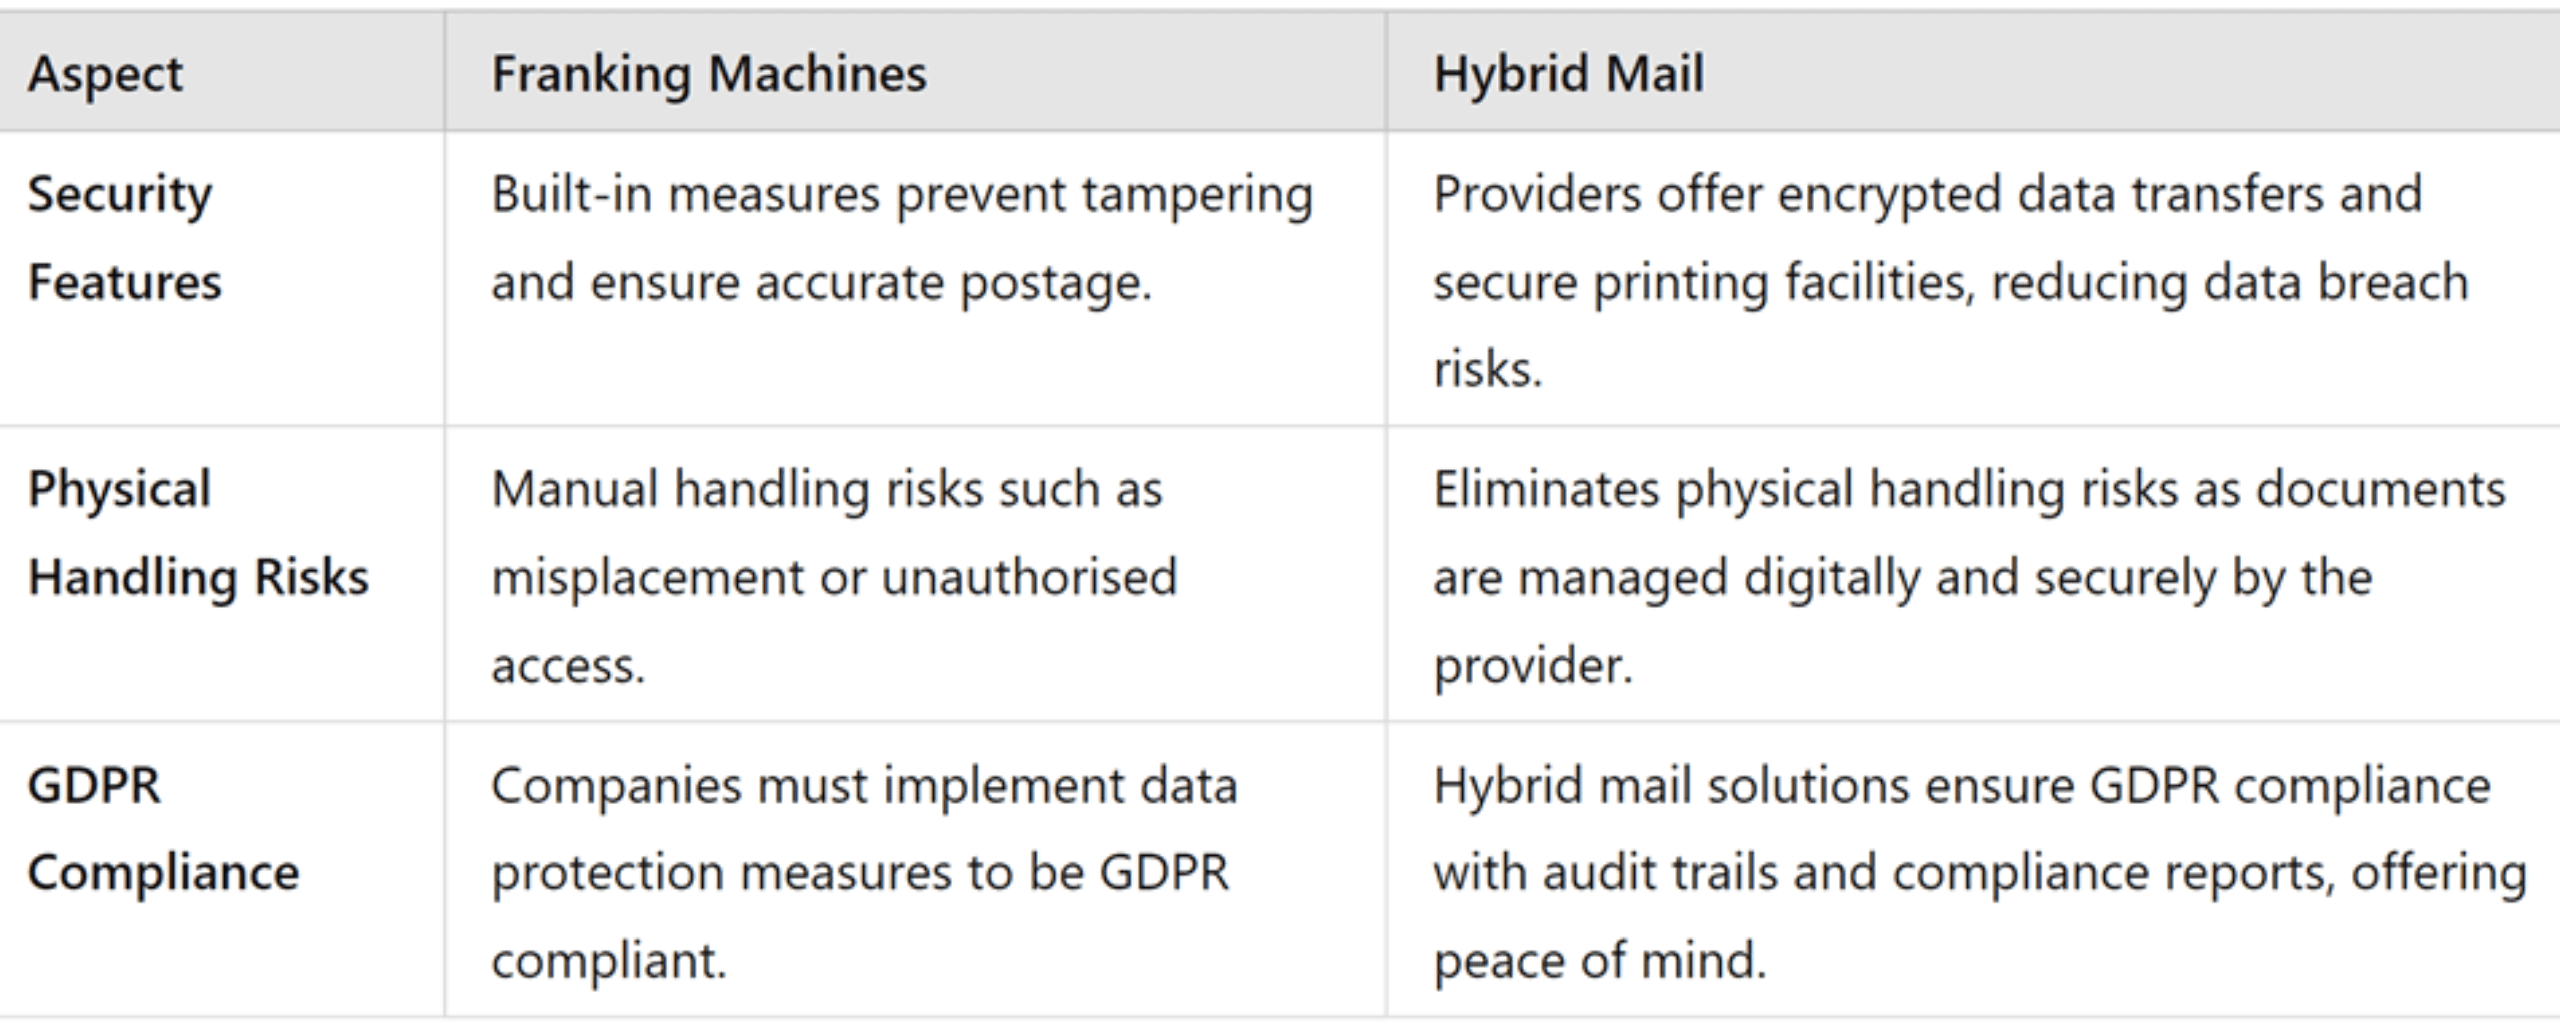 Franking Machine vs Hybrid Mail: Security and Compliance Comparison